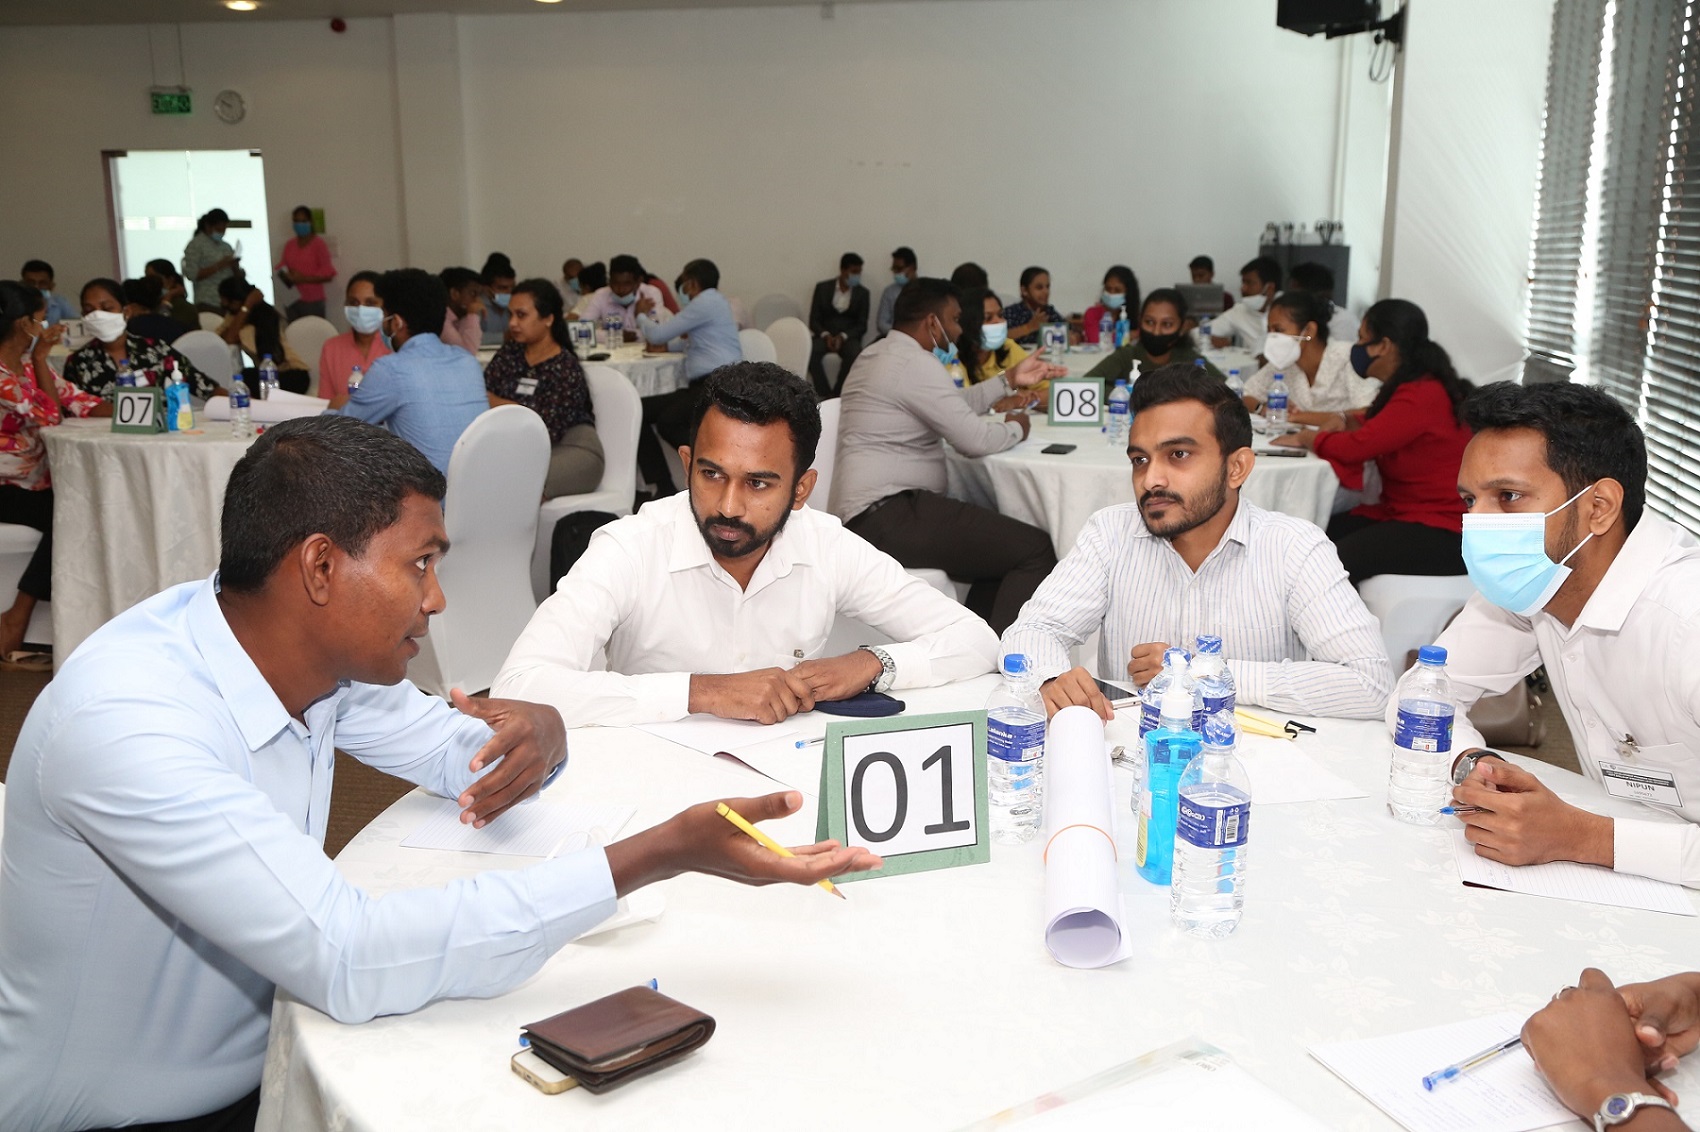 CA passed finalists taking part in an interactive activity at the skills development program organised by CA Sri Lanka.